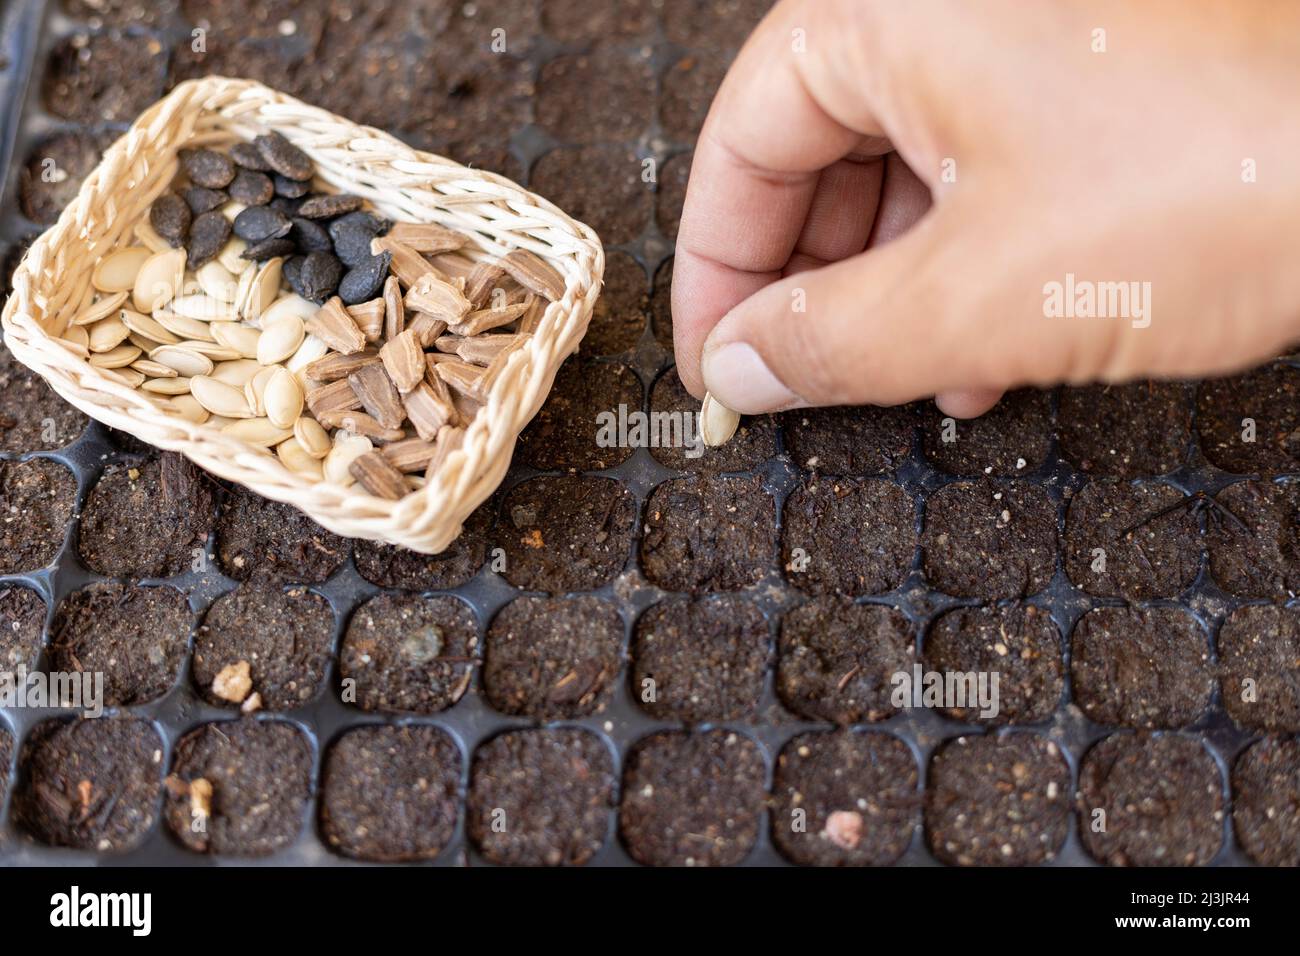 Sowing vegetable seeds in a seed tray Stock Photo